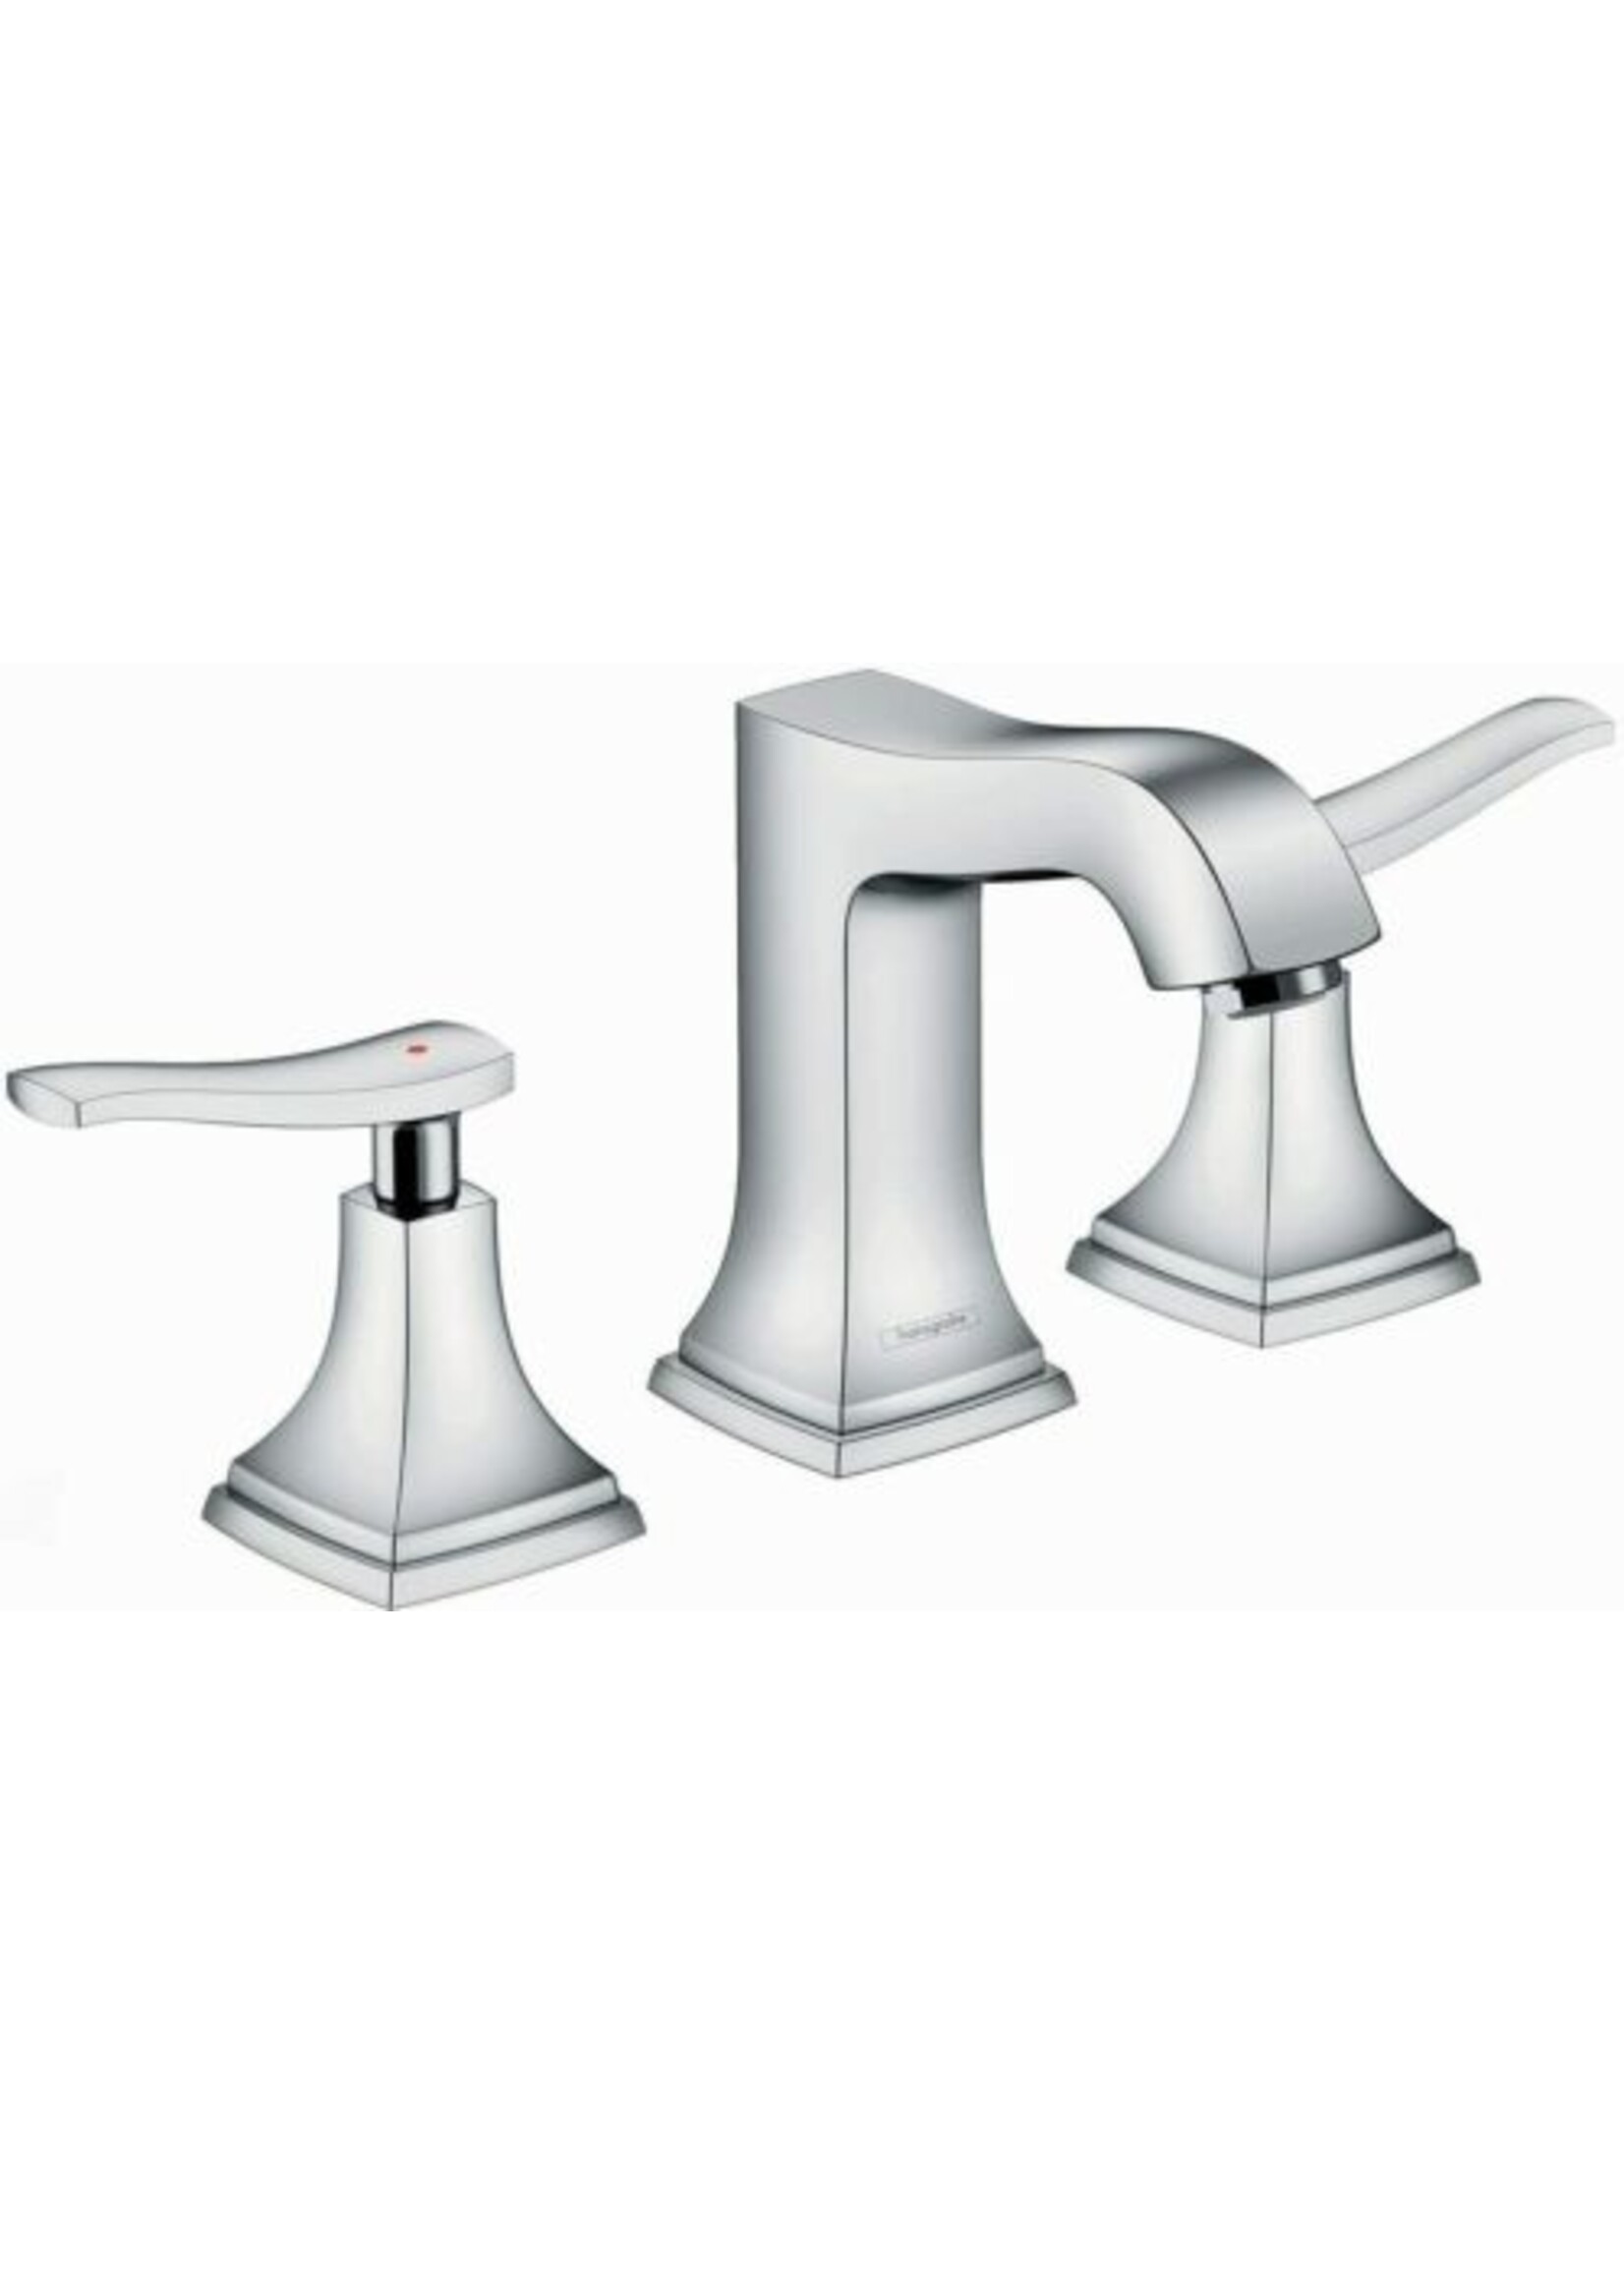 Hansgrohe Hansgrohe Metropol Classic Widespread Faucet 110 with Cross Handles and Pop-Up Drain, 1.2 GPM- Chrome